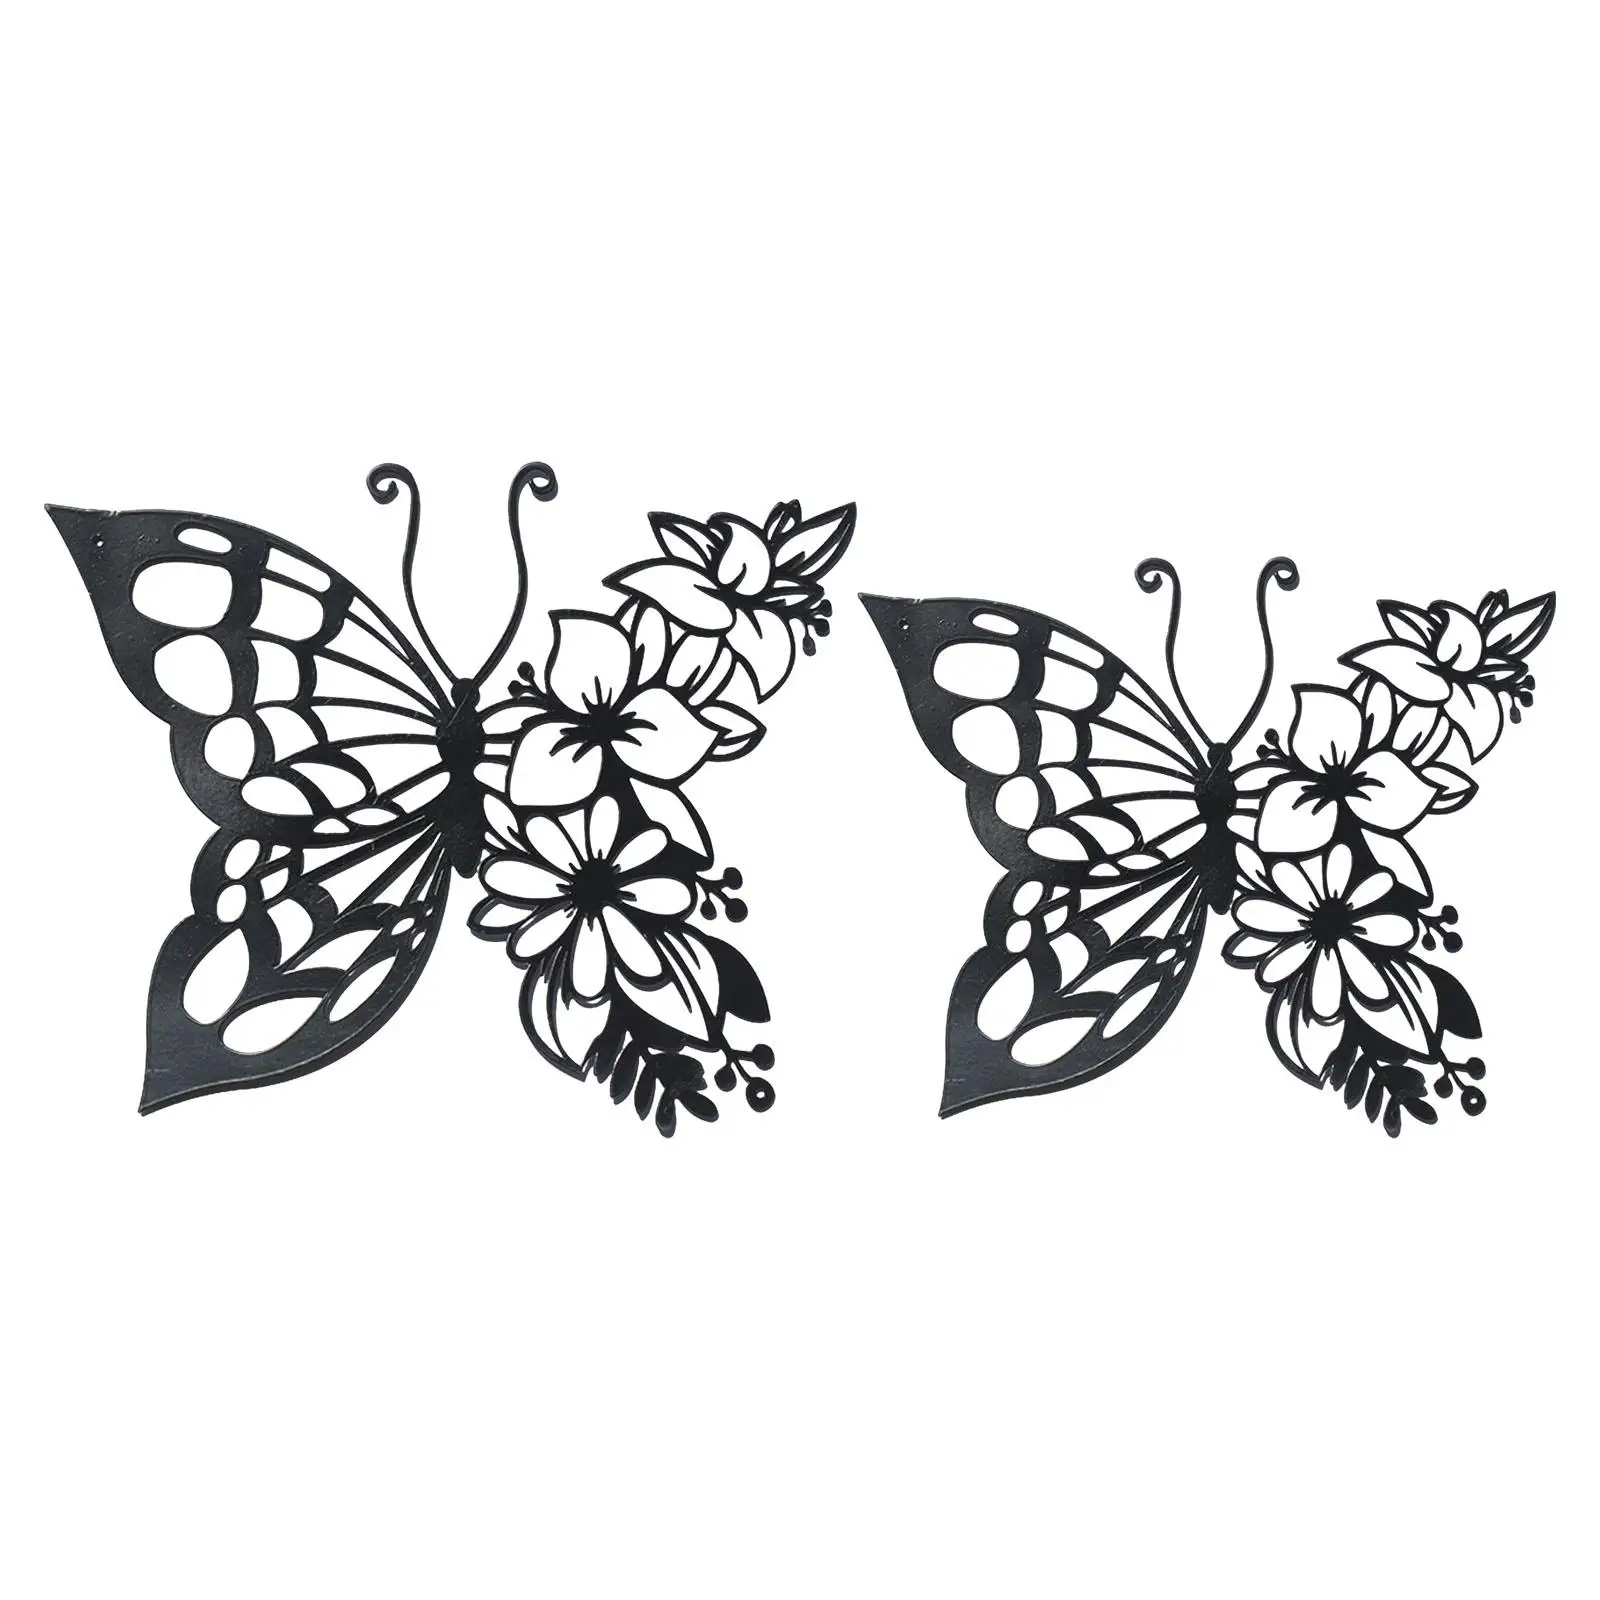 Butterflies Wall Art Figurines Silhouette Wrought Iron Ornaments Hanging Office